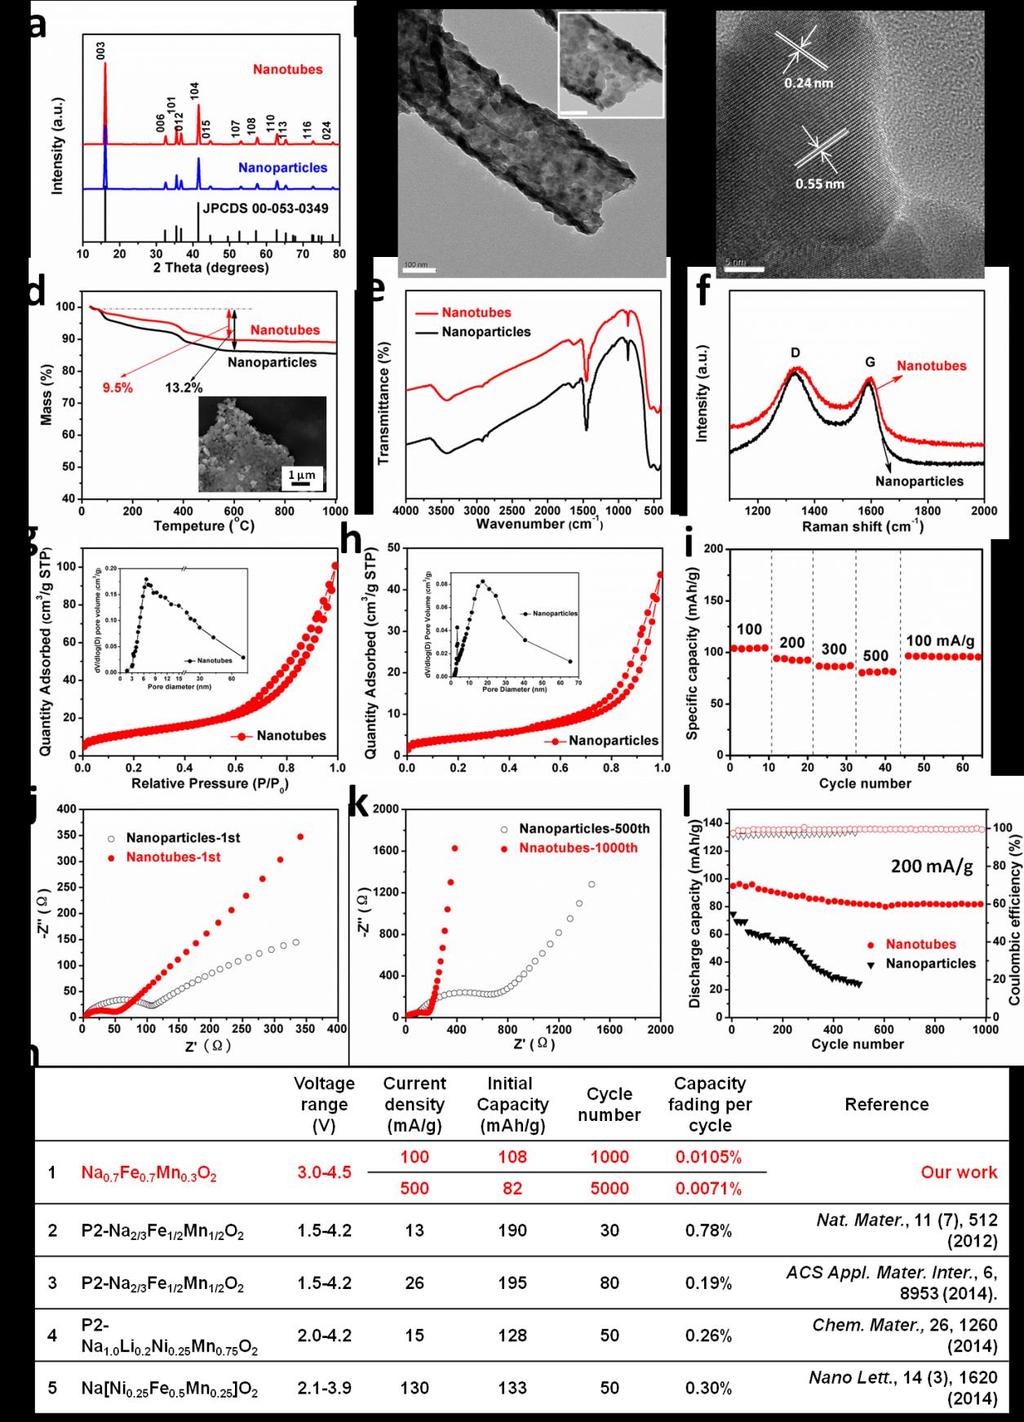 Supplementary Figure 8 Characterization and electrochemical performance of Na 0.7 Fe 0.7 Mn 0.3 O 2 mesoporous nanotubes and nanoparticles in sodium-ion batteries. a, XRD patterns of Na 0.7 Fe 0.7 Mn 0.3 O 2 mesoporous nanotubes and nanoparticles. b, TEM images of Na 0.